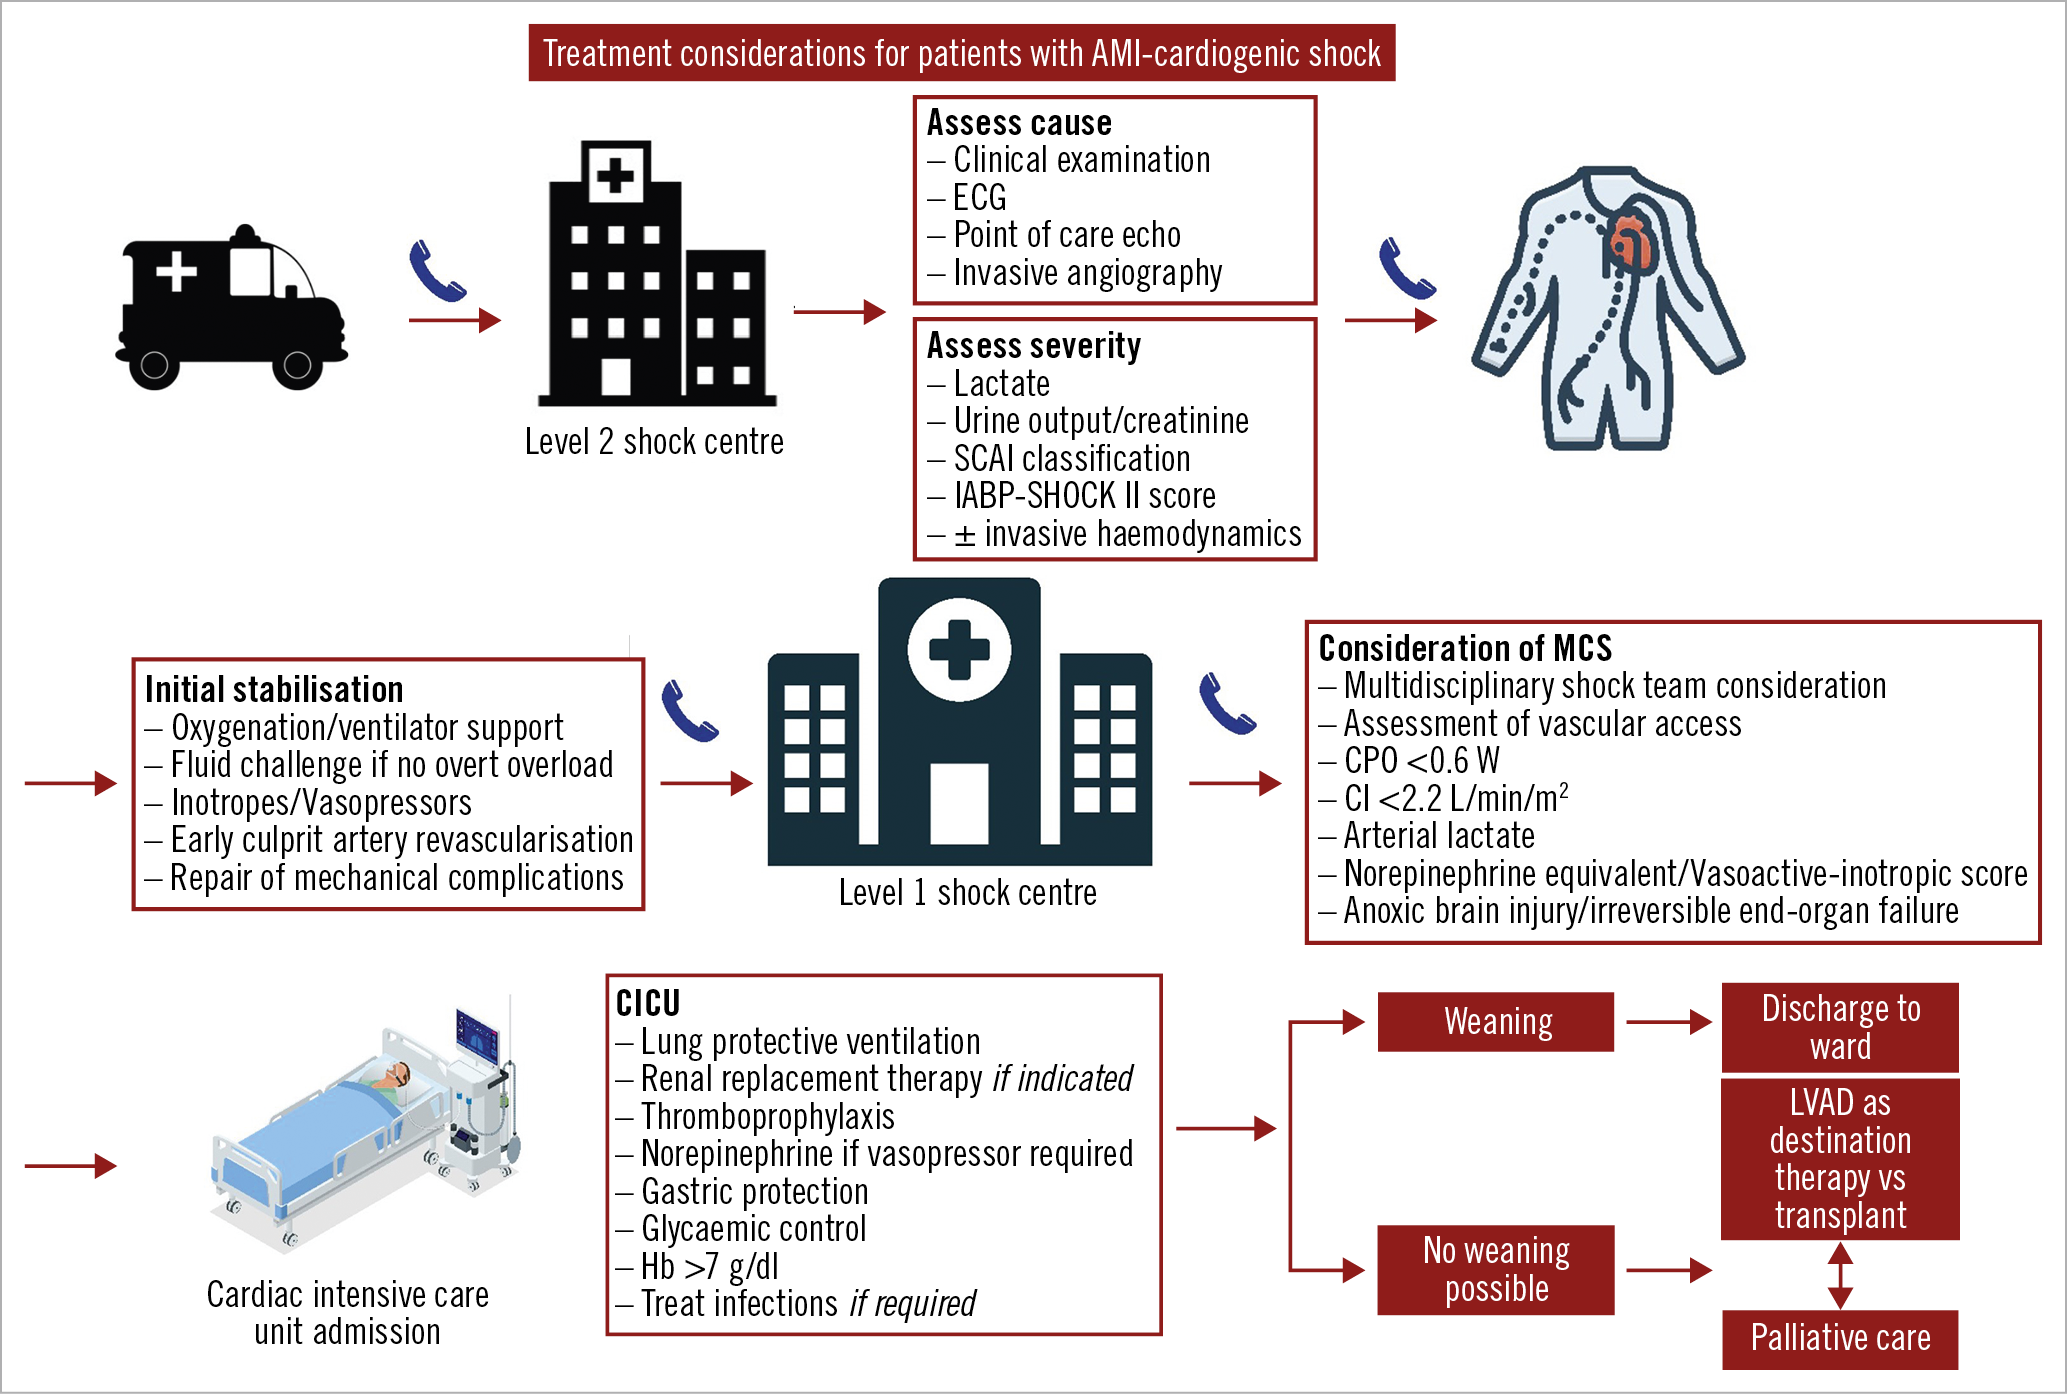 Central illustration. Treatment algorithm highlighting the key considerations in the diagnosis and management of cardiogenic shock. A level I shock centre has cardiac catheterisation and advanced MCS available 24 hrs, 7 days/week with on-site cardiothoracic surgery support, level II has PCI facilities 24/7 but is without on-site MCS. AMI: acute myocardial infarction; CI: cardiac index; CICU: cardiac intensive care unit; CPO: cardiac power output; ECG: electrocardiogram; Hb: haemoglobin; LVAD: left ventricular assist device; MCS: mechanical circulatory support; SCAI: Society for Cardiovascular Angiography and Interventions